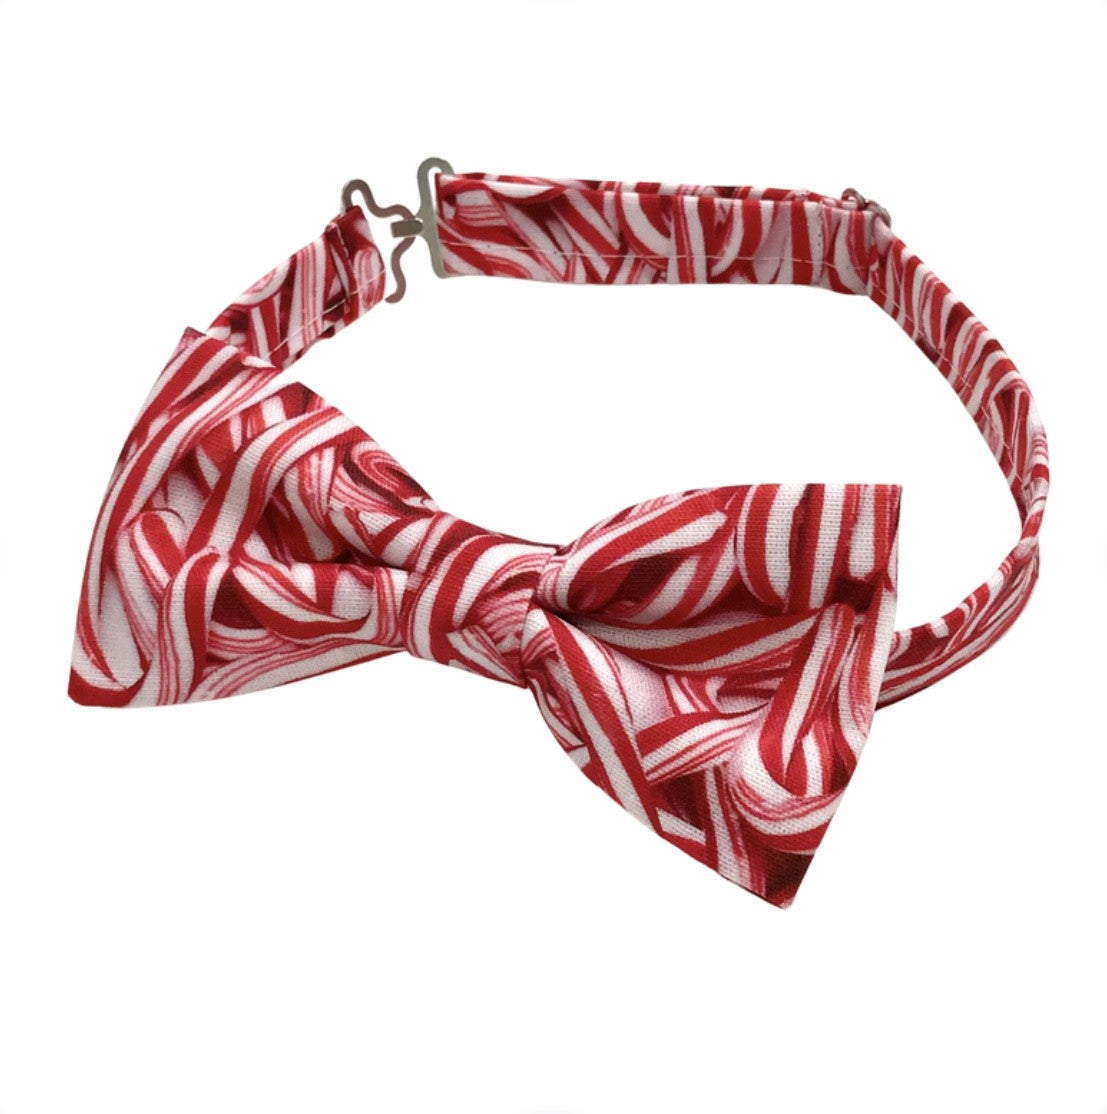 Bow tie with Candy Cane Print 